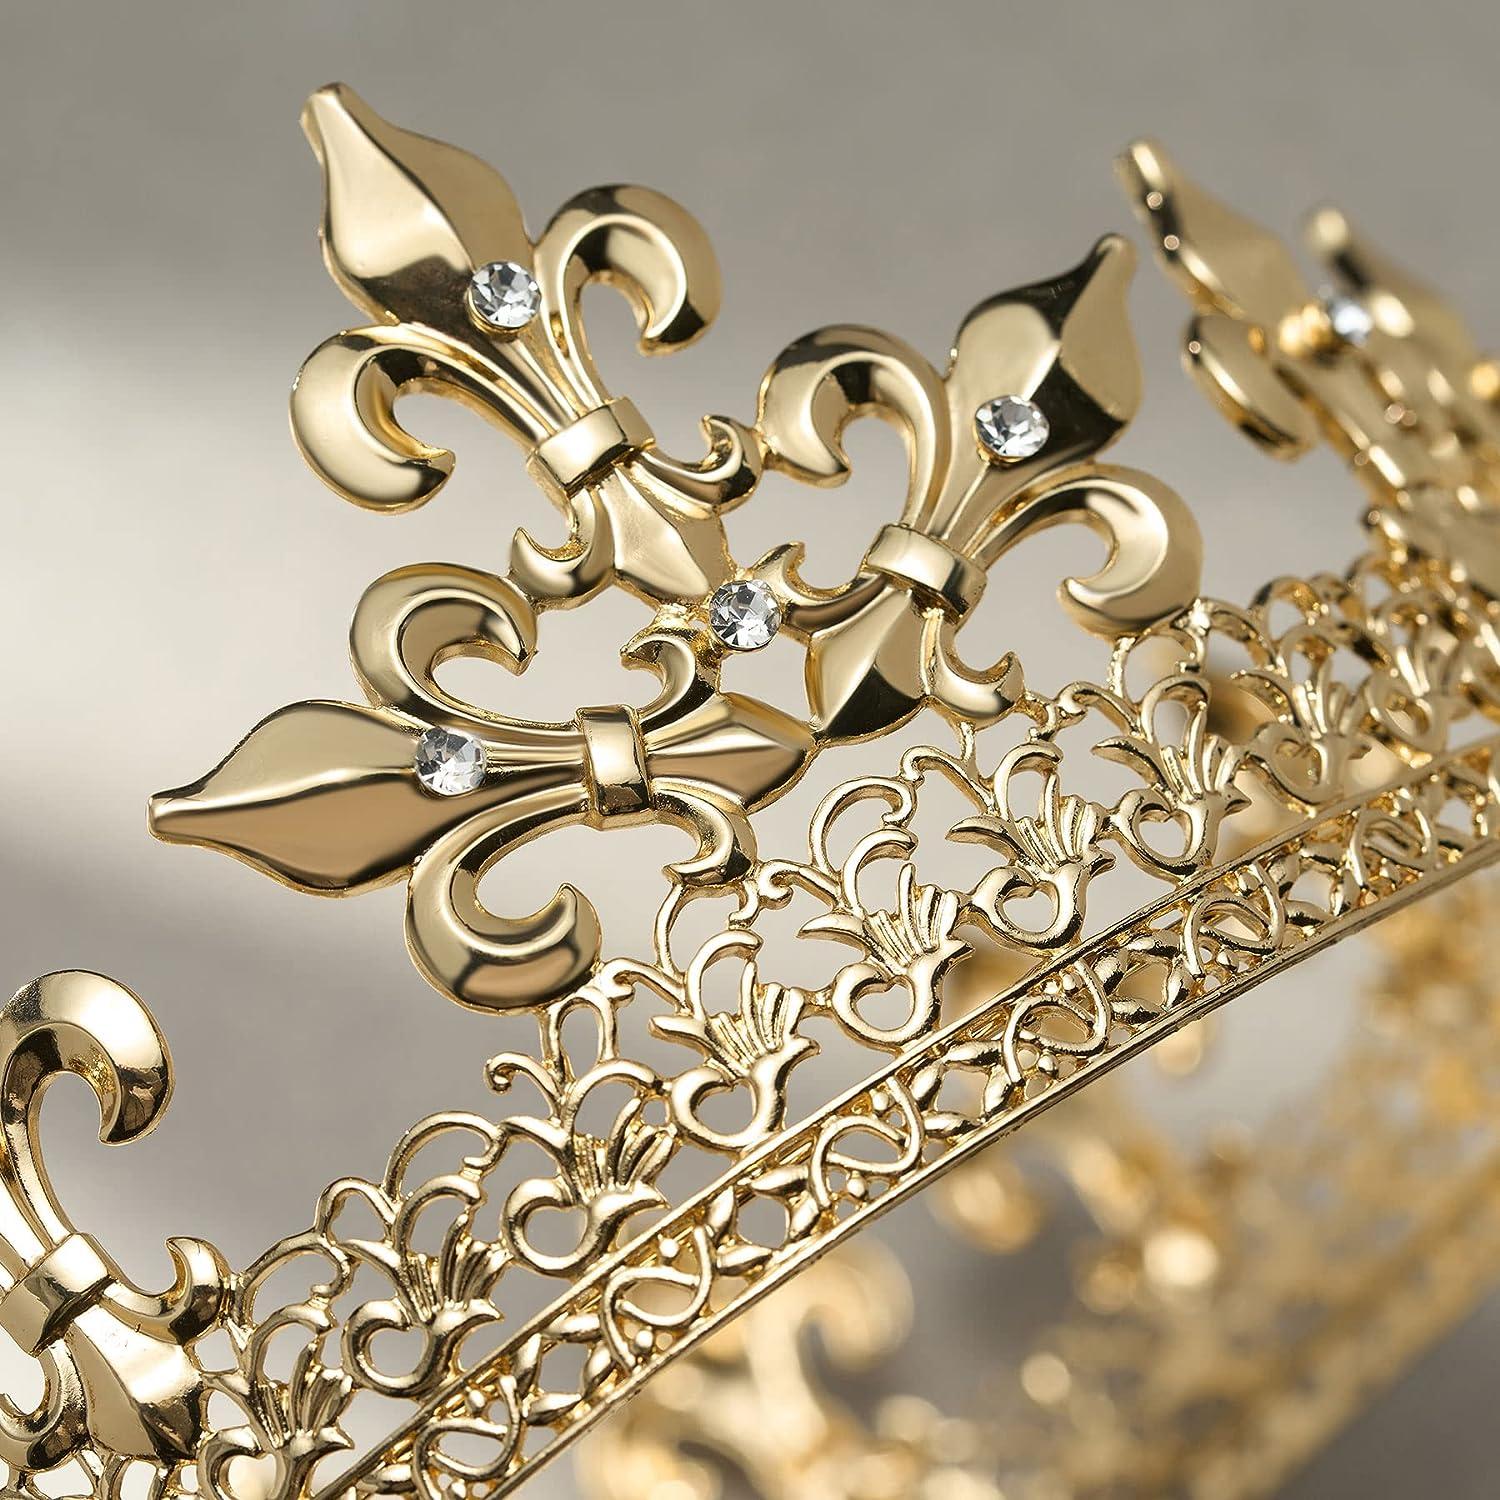 Sweetv Gold King Crown For Men Royal Full Prince Tiaras And Crowns Metal Mens Headpieces